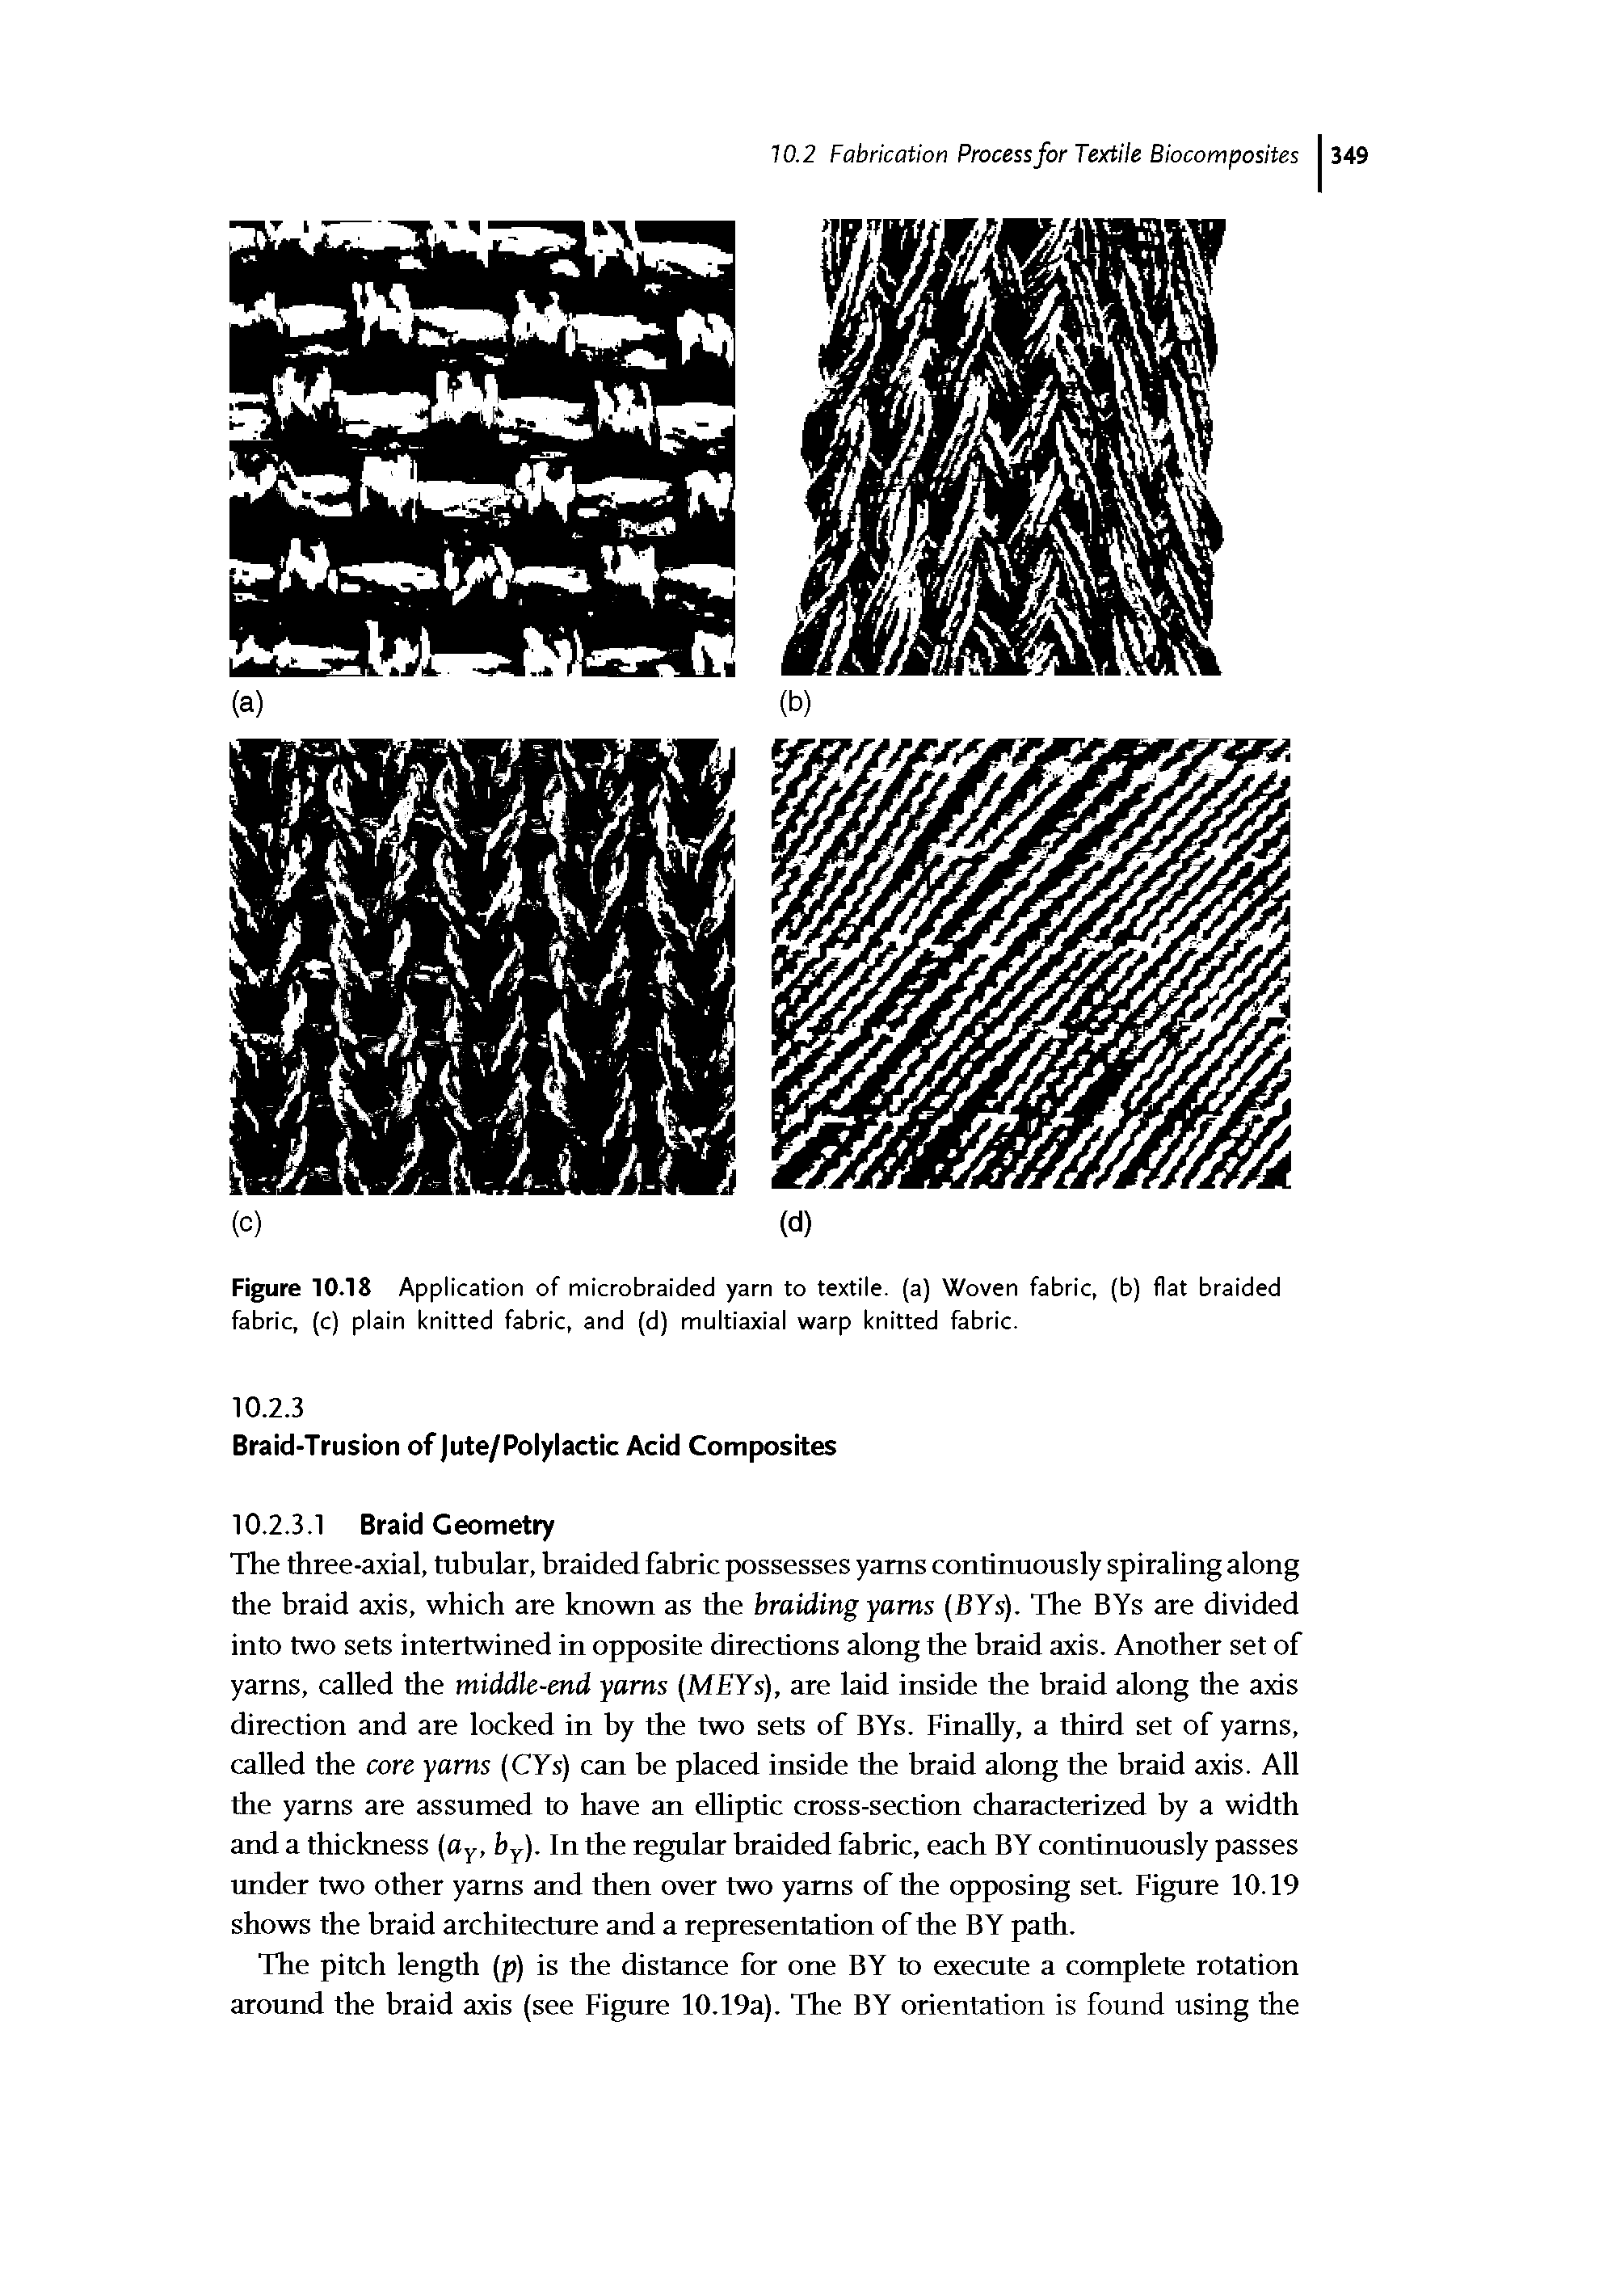 Figure 10.18 Application of microbraided yarn to textile, (a) Woven fabric, (b) flat braided fabric, (c) plain knitted fabric, and (d) multiaxial warp knitted fabric.